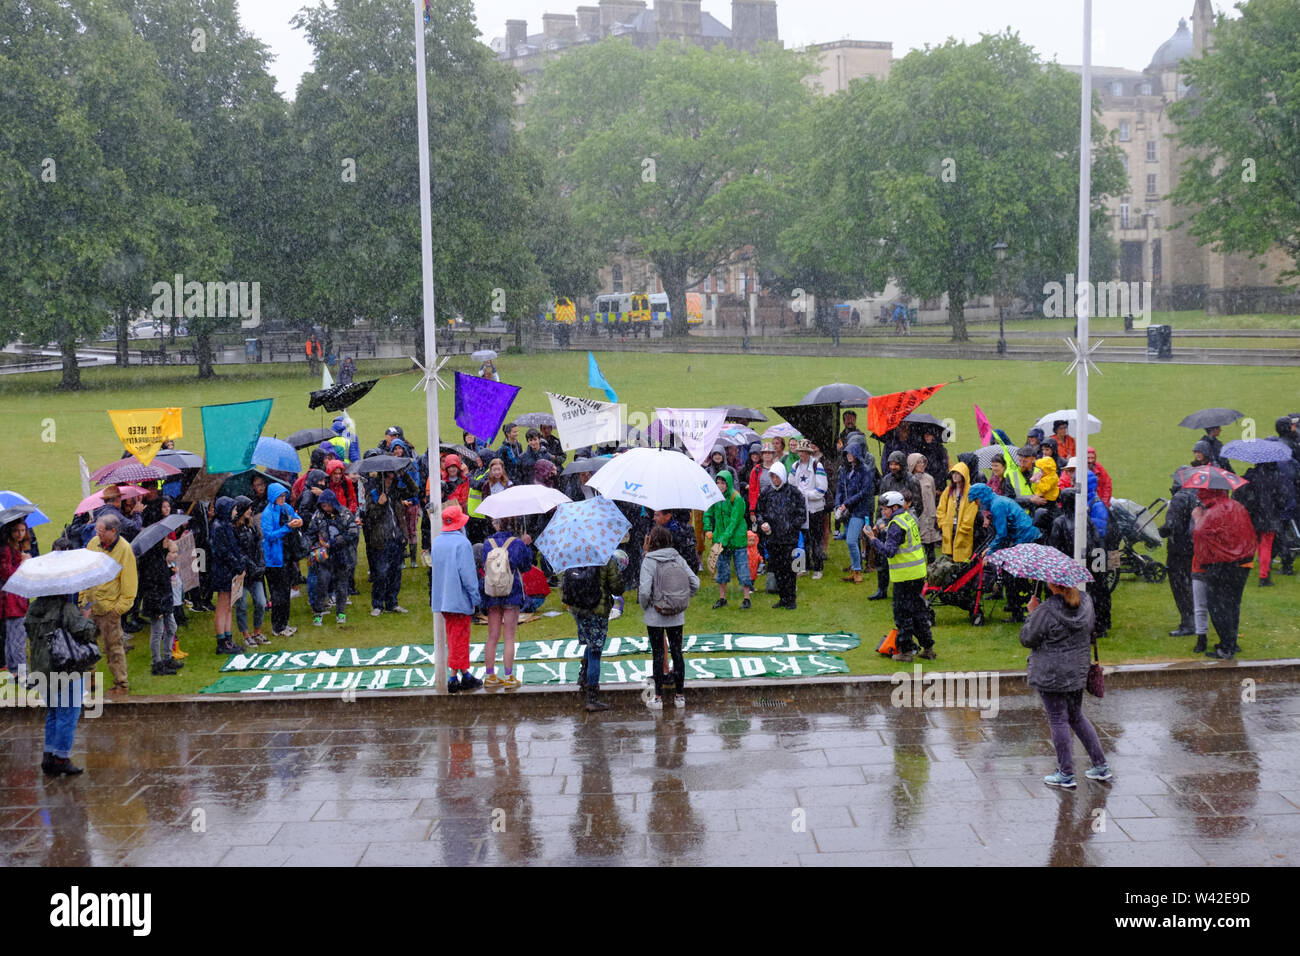 Bristol, UK. 19th July 2019. Rain pours on the Extinction Rebellion youth rally on college Green in Bristol City center. This is the 5th day of the climate change protest in the city. Credit: Mr Standfast/Alamy Live News Stock Photo